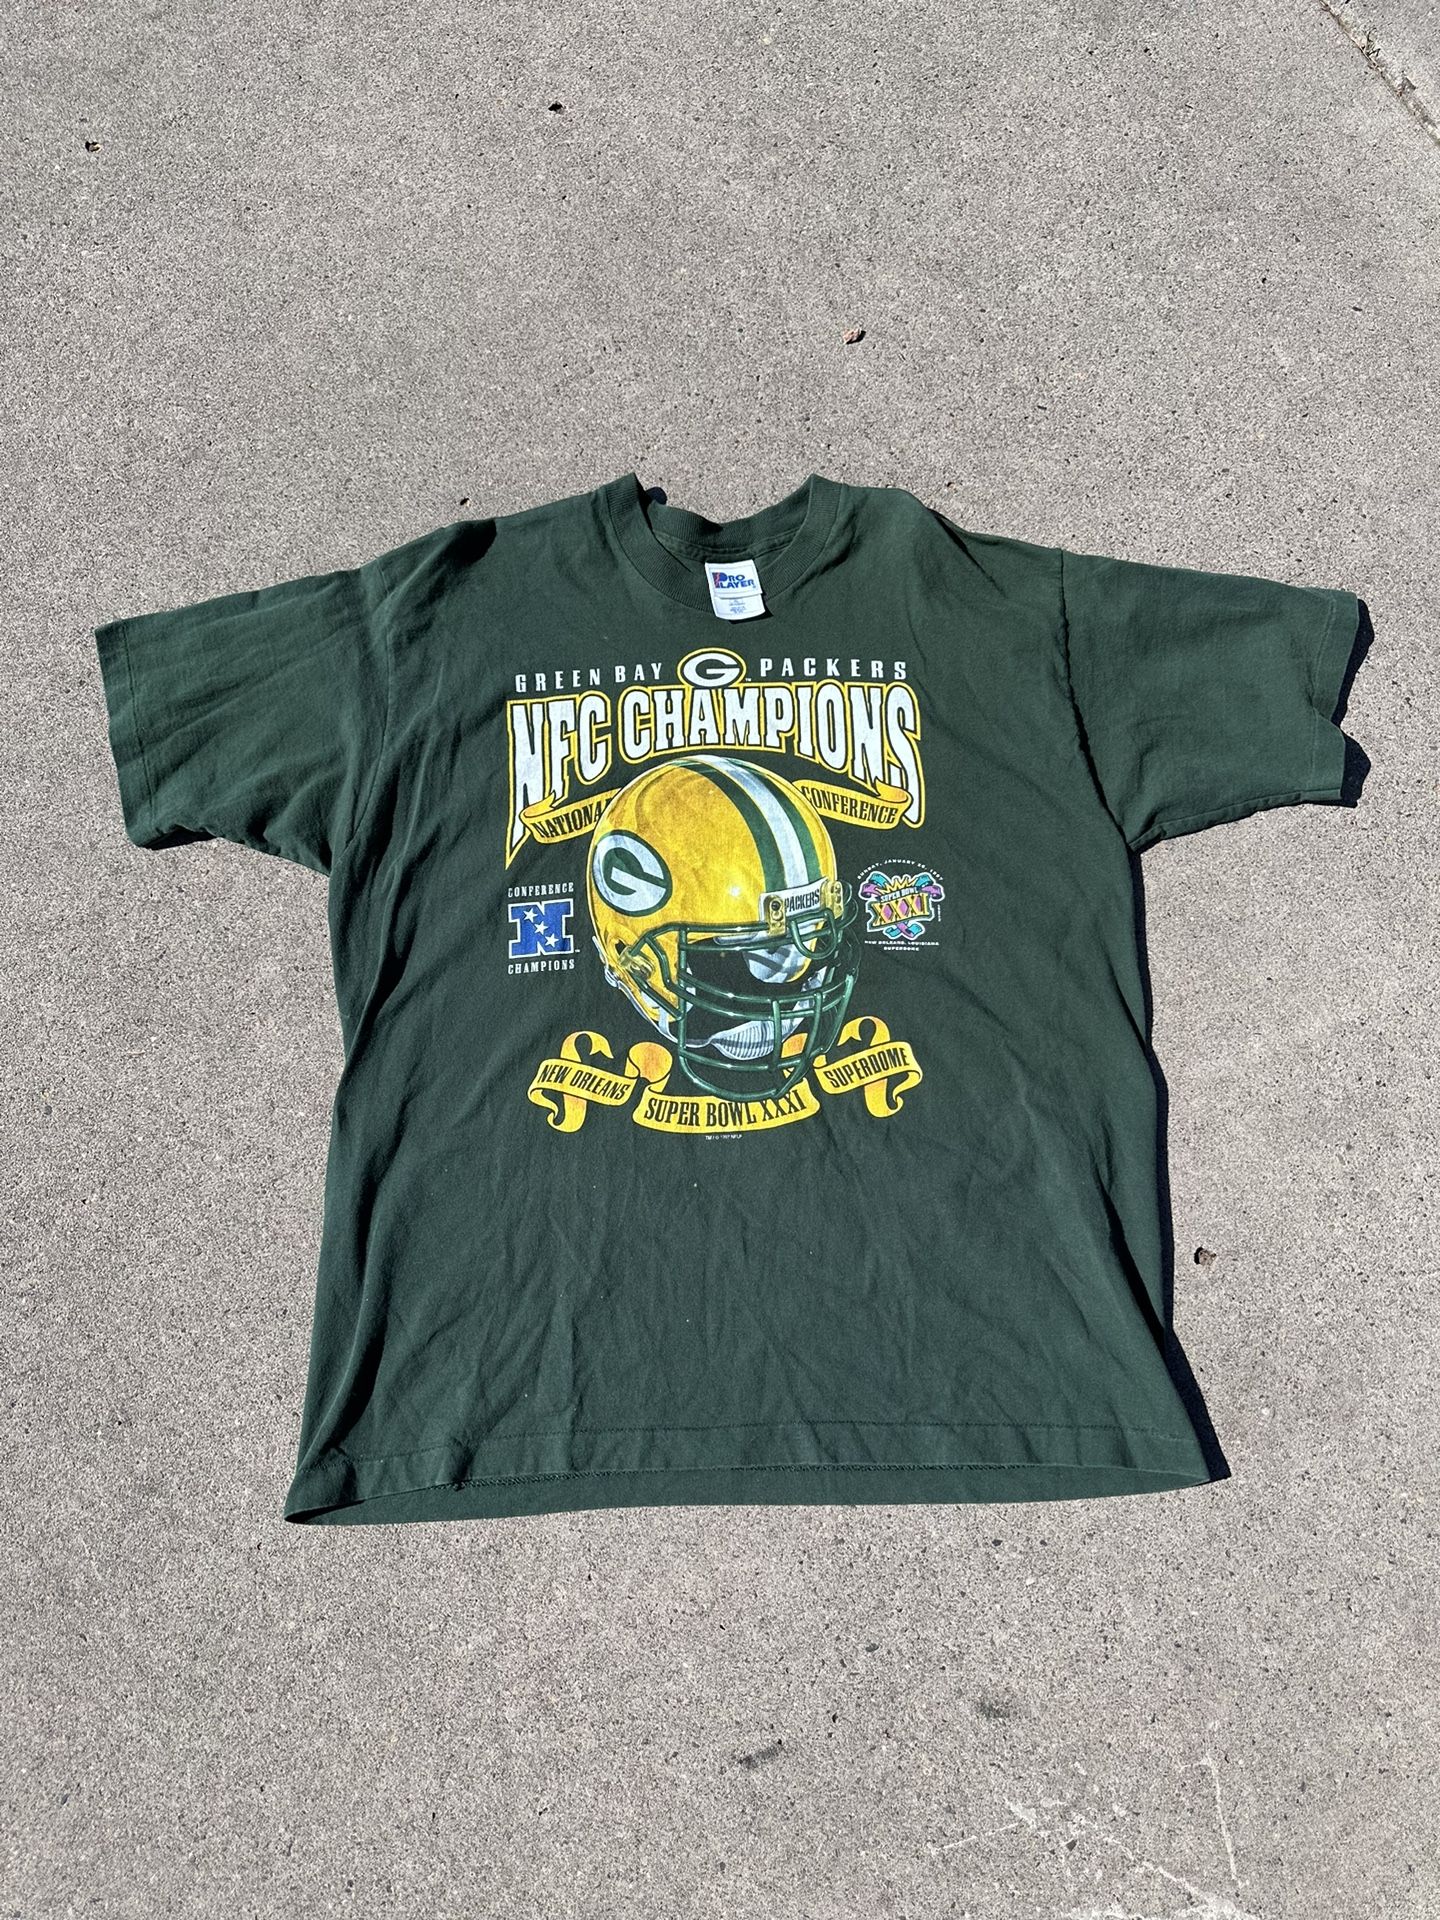 Vintage 1997 Green Bay Packers NFC Champions Super Bowl